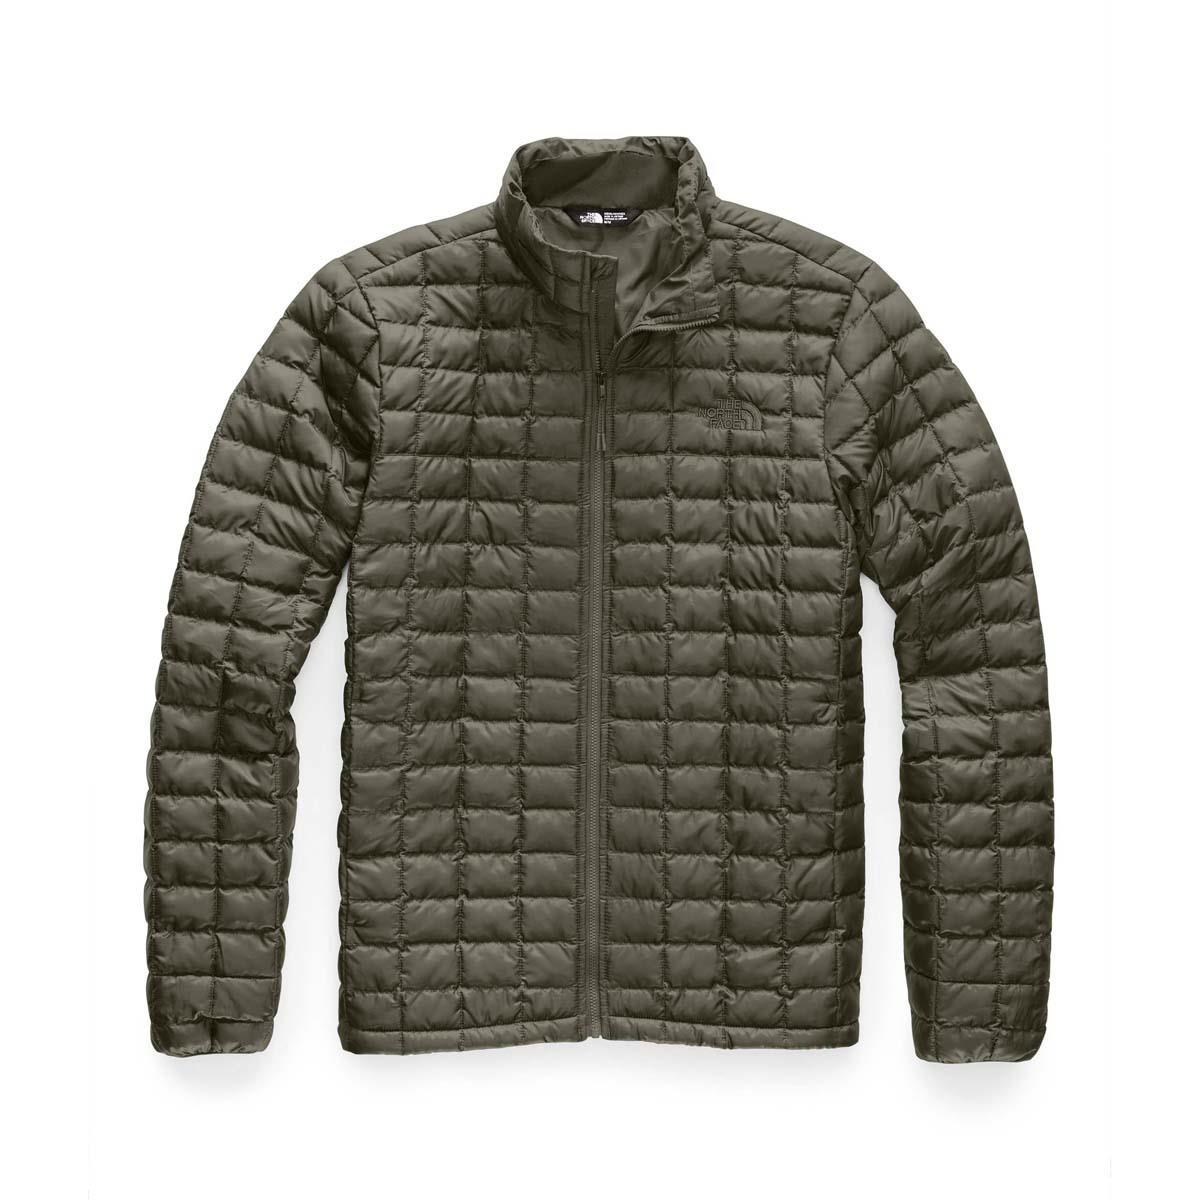 Men The North Face Thermoball ECO Jacket - NF0A3Y3N | Buckmans.com